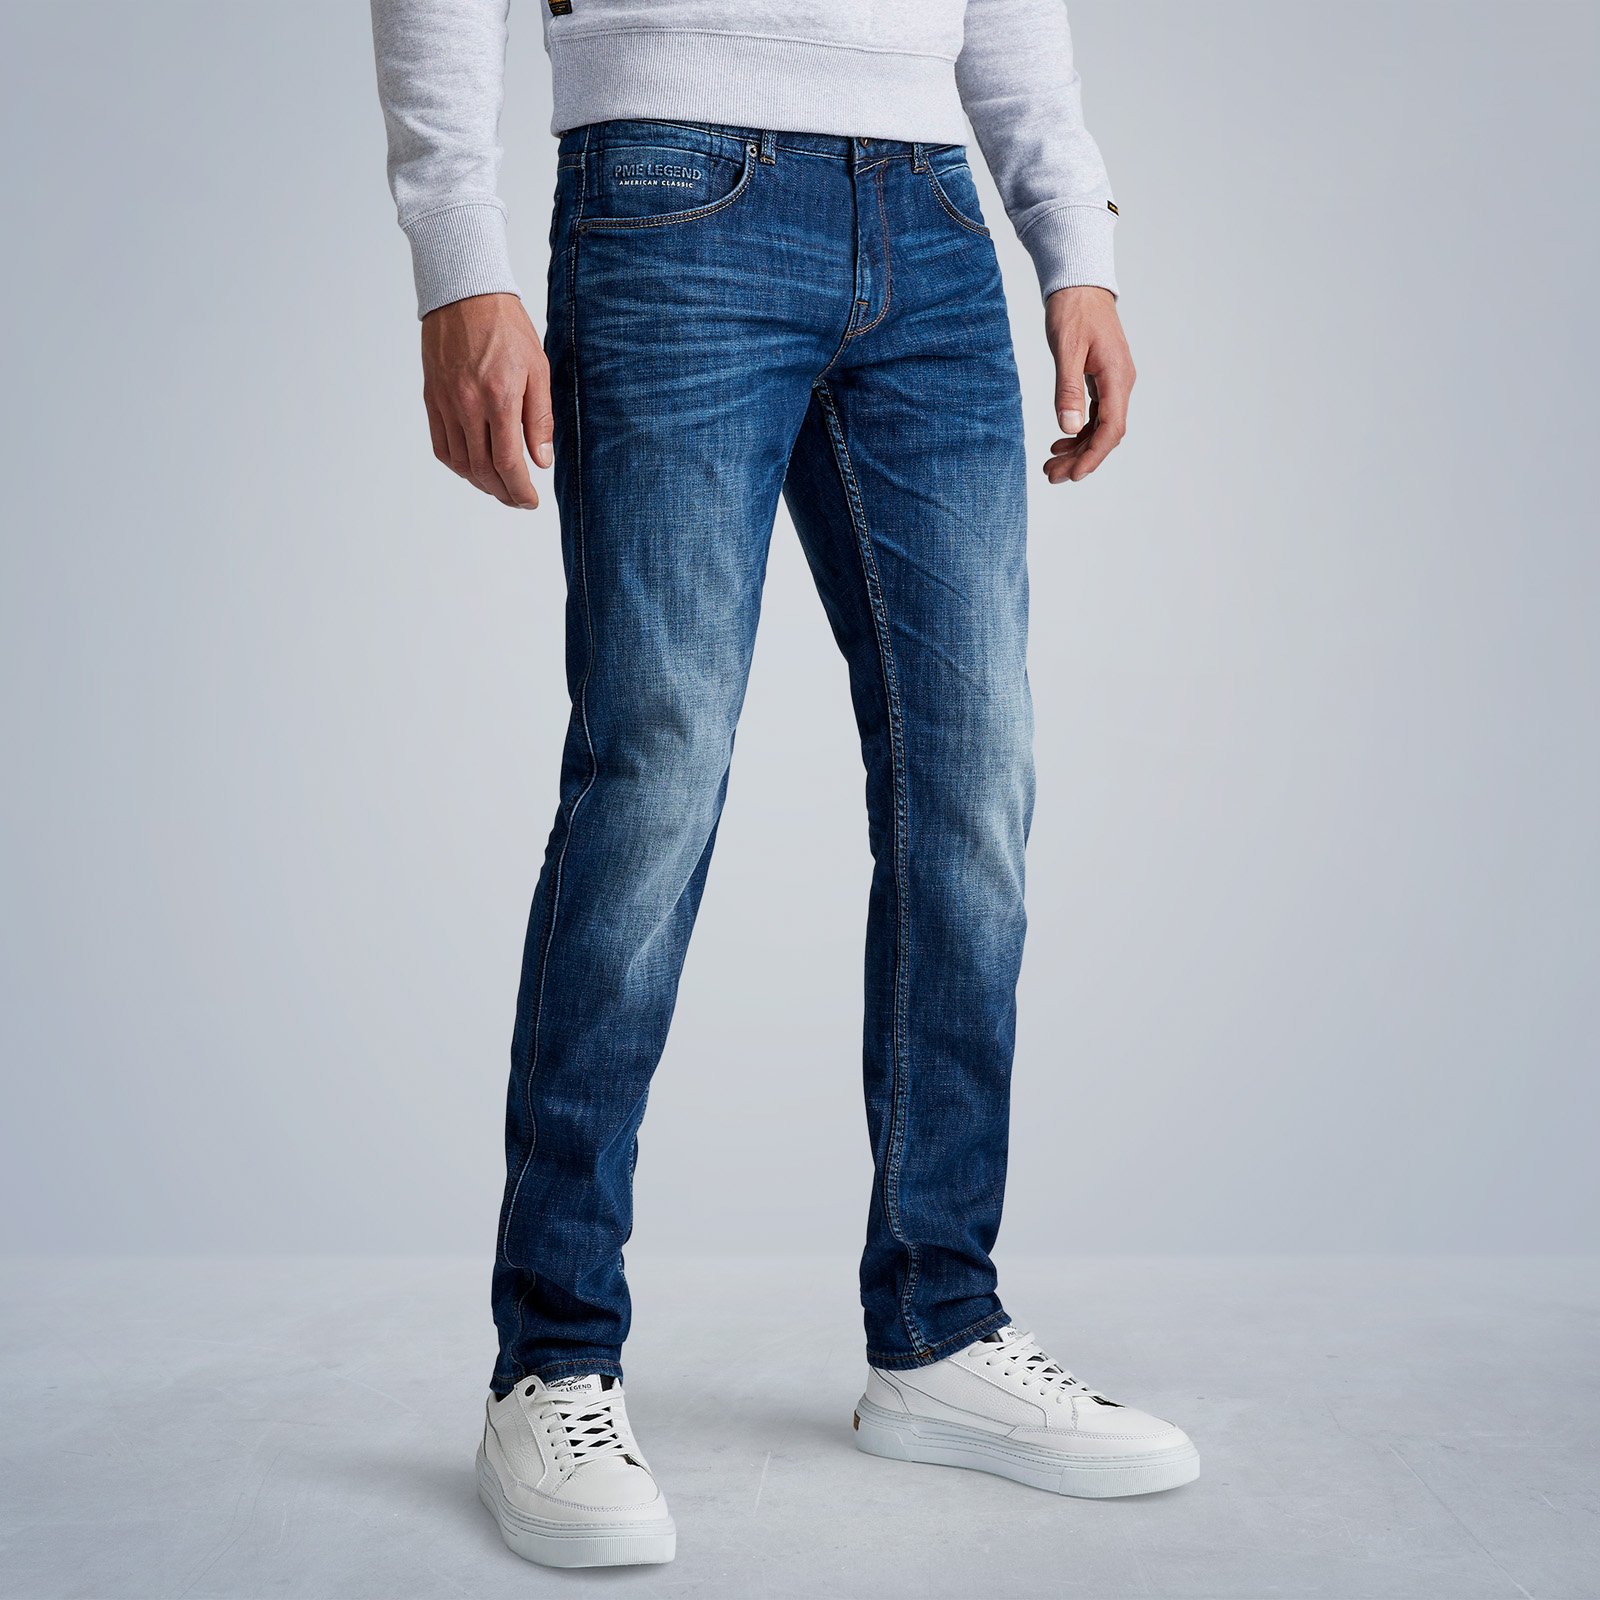 JEANS PME Legend Nightflight jeans | Free shipping and returns